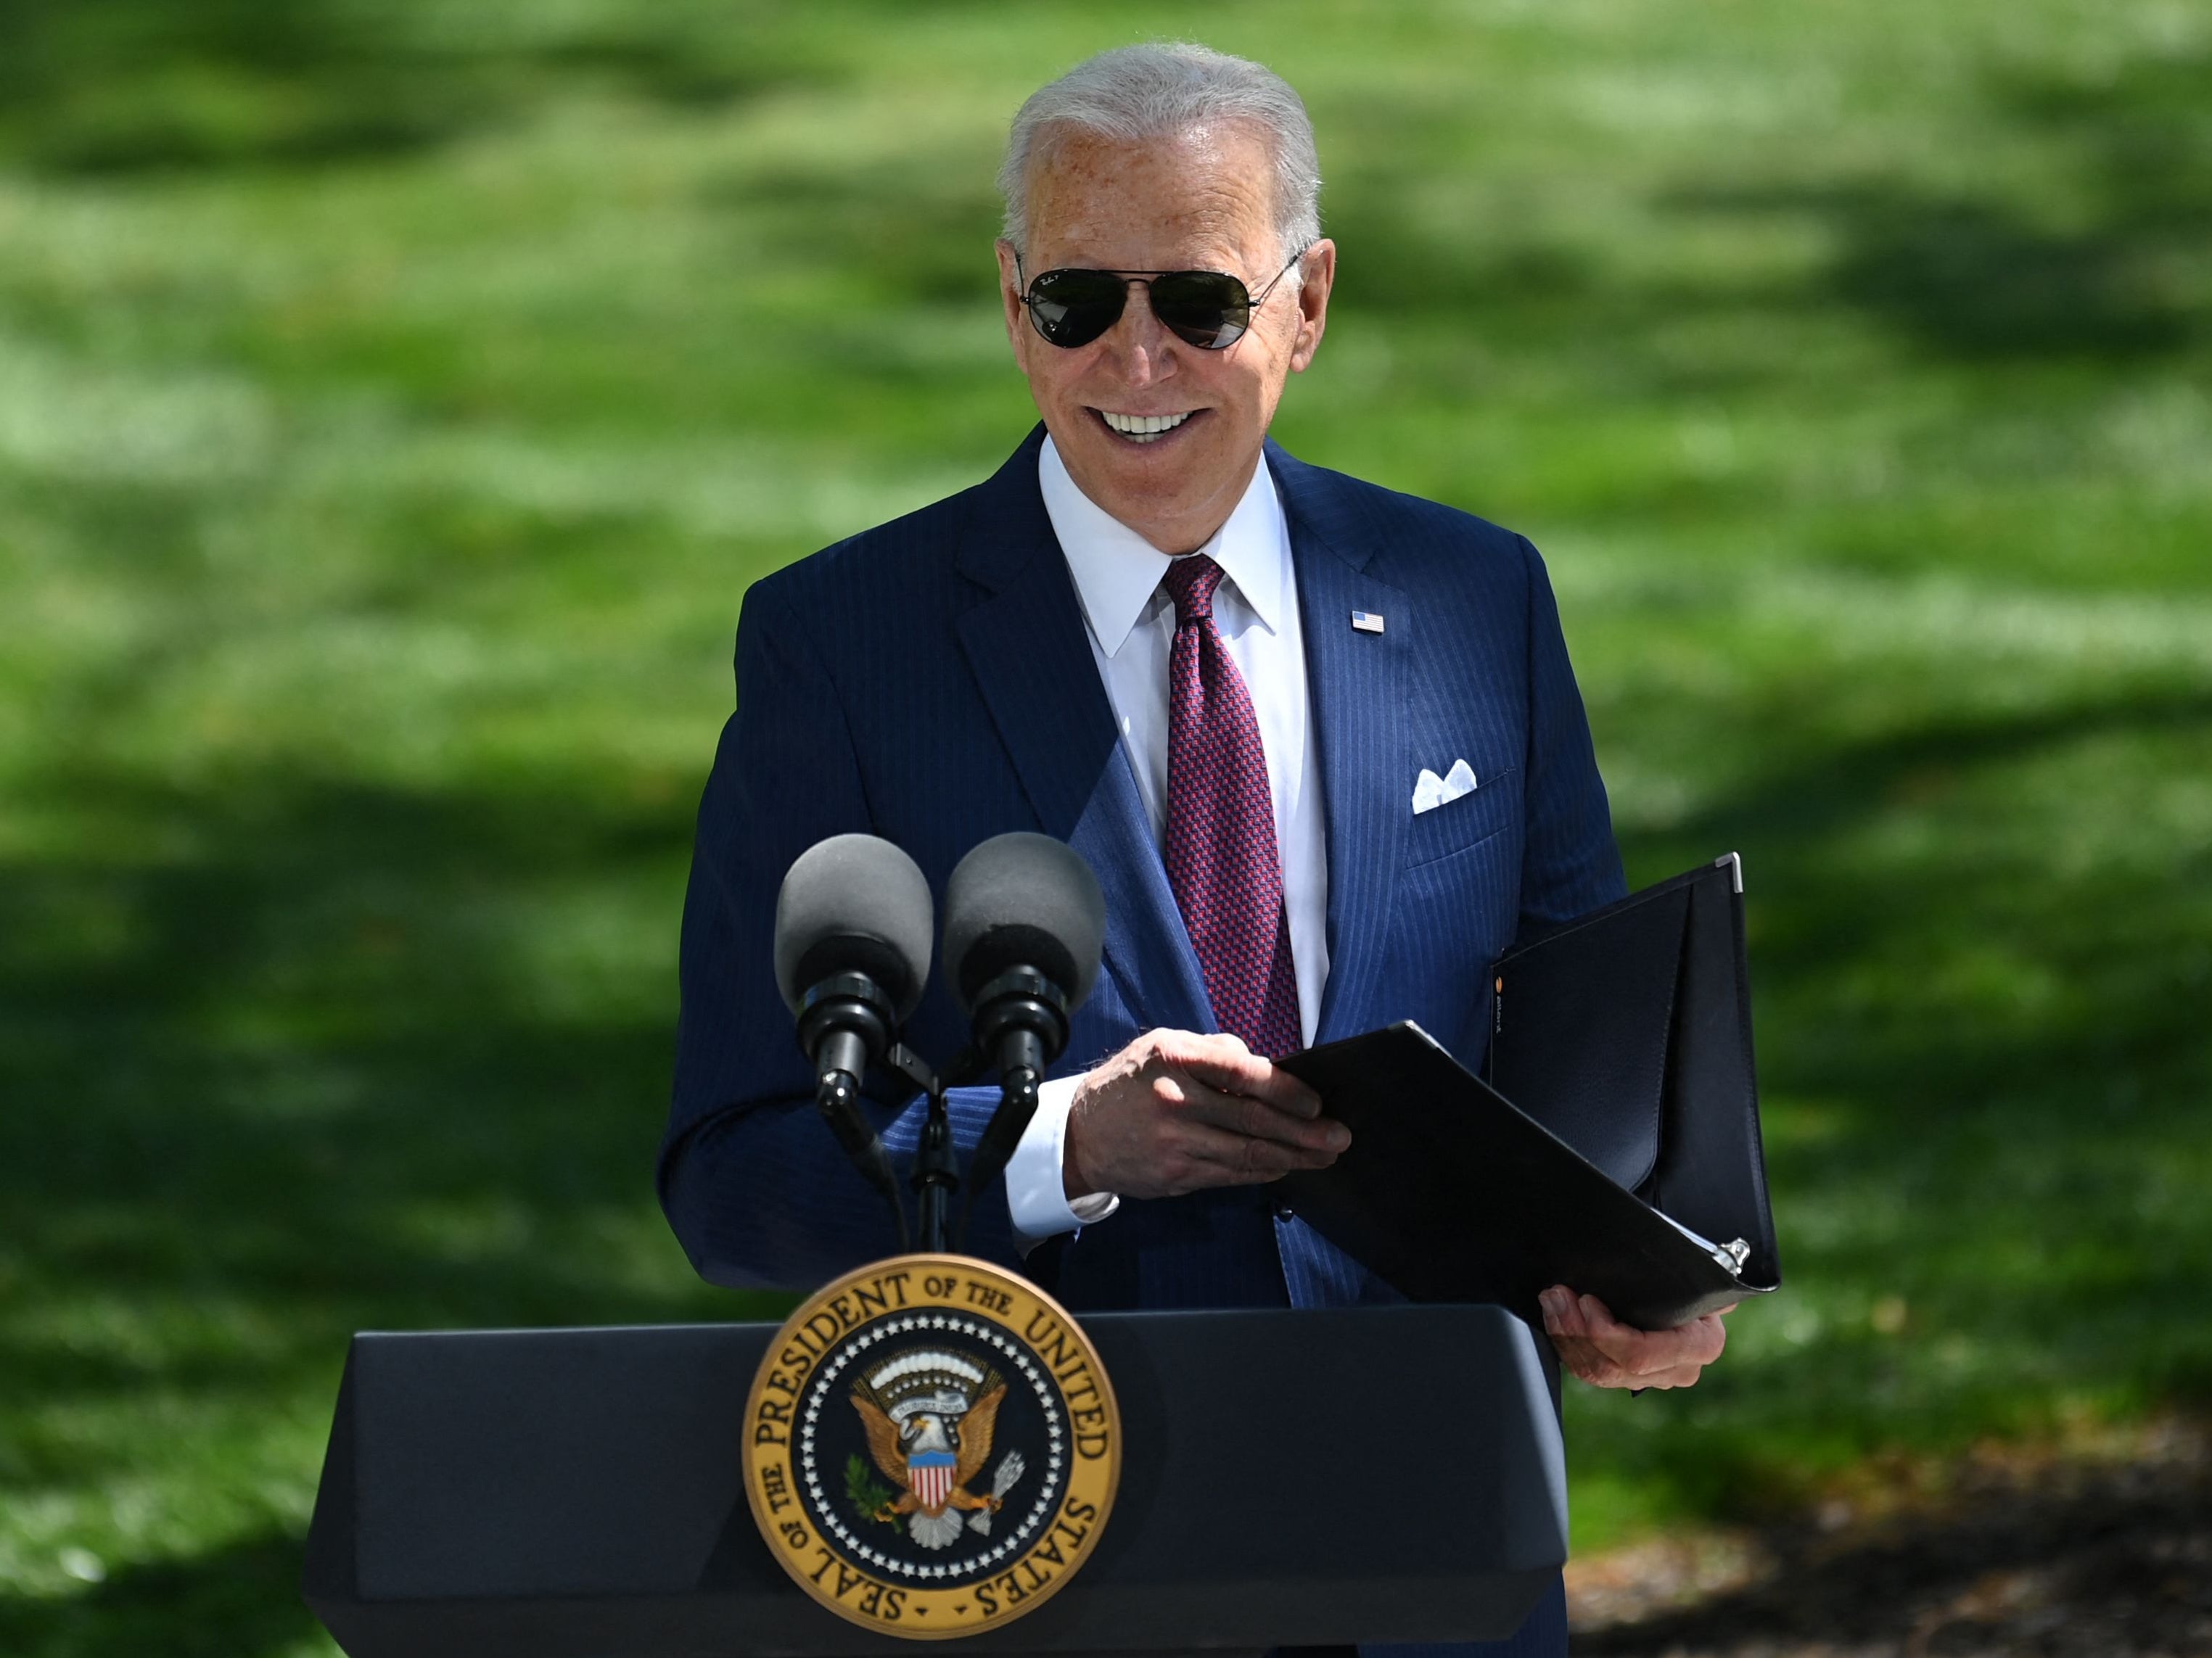 Delivering remarks on the new CDC rules, Joe Biden emerged from the White House with a mask on, but returned in his trademark aviator sunglasses